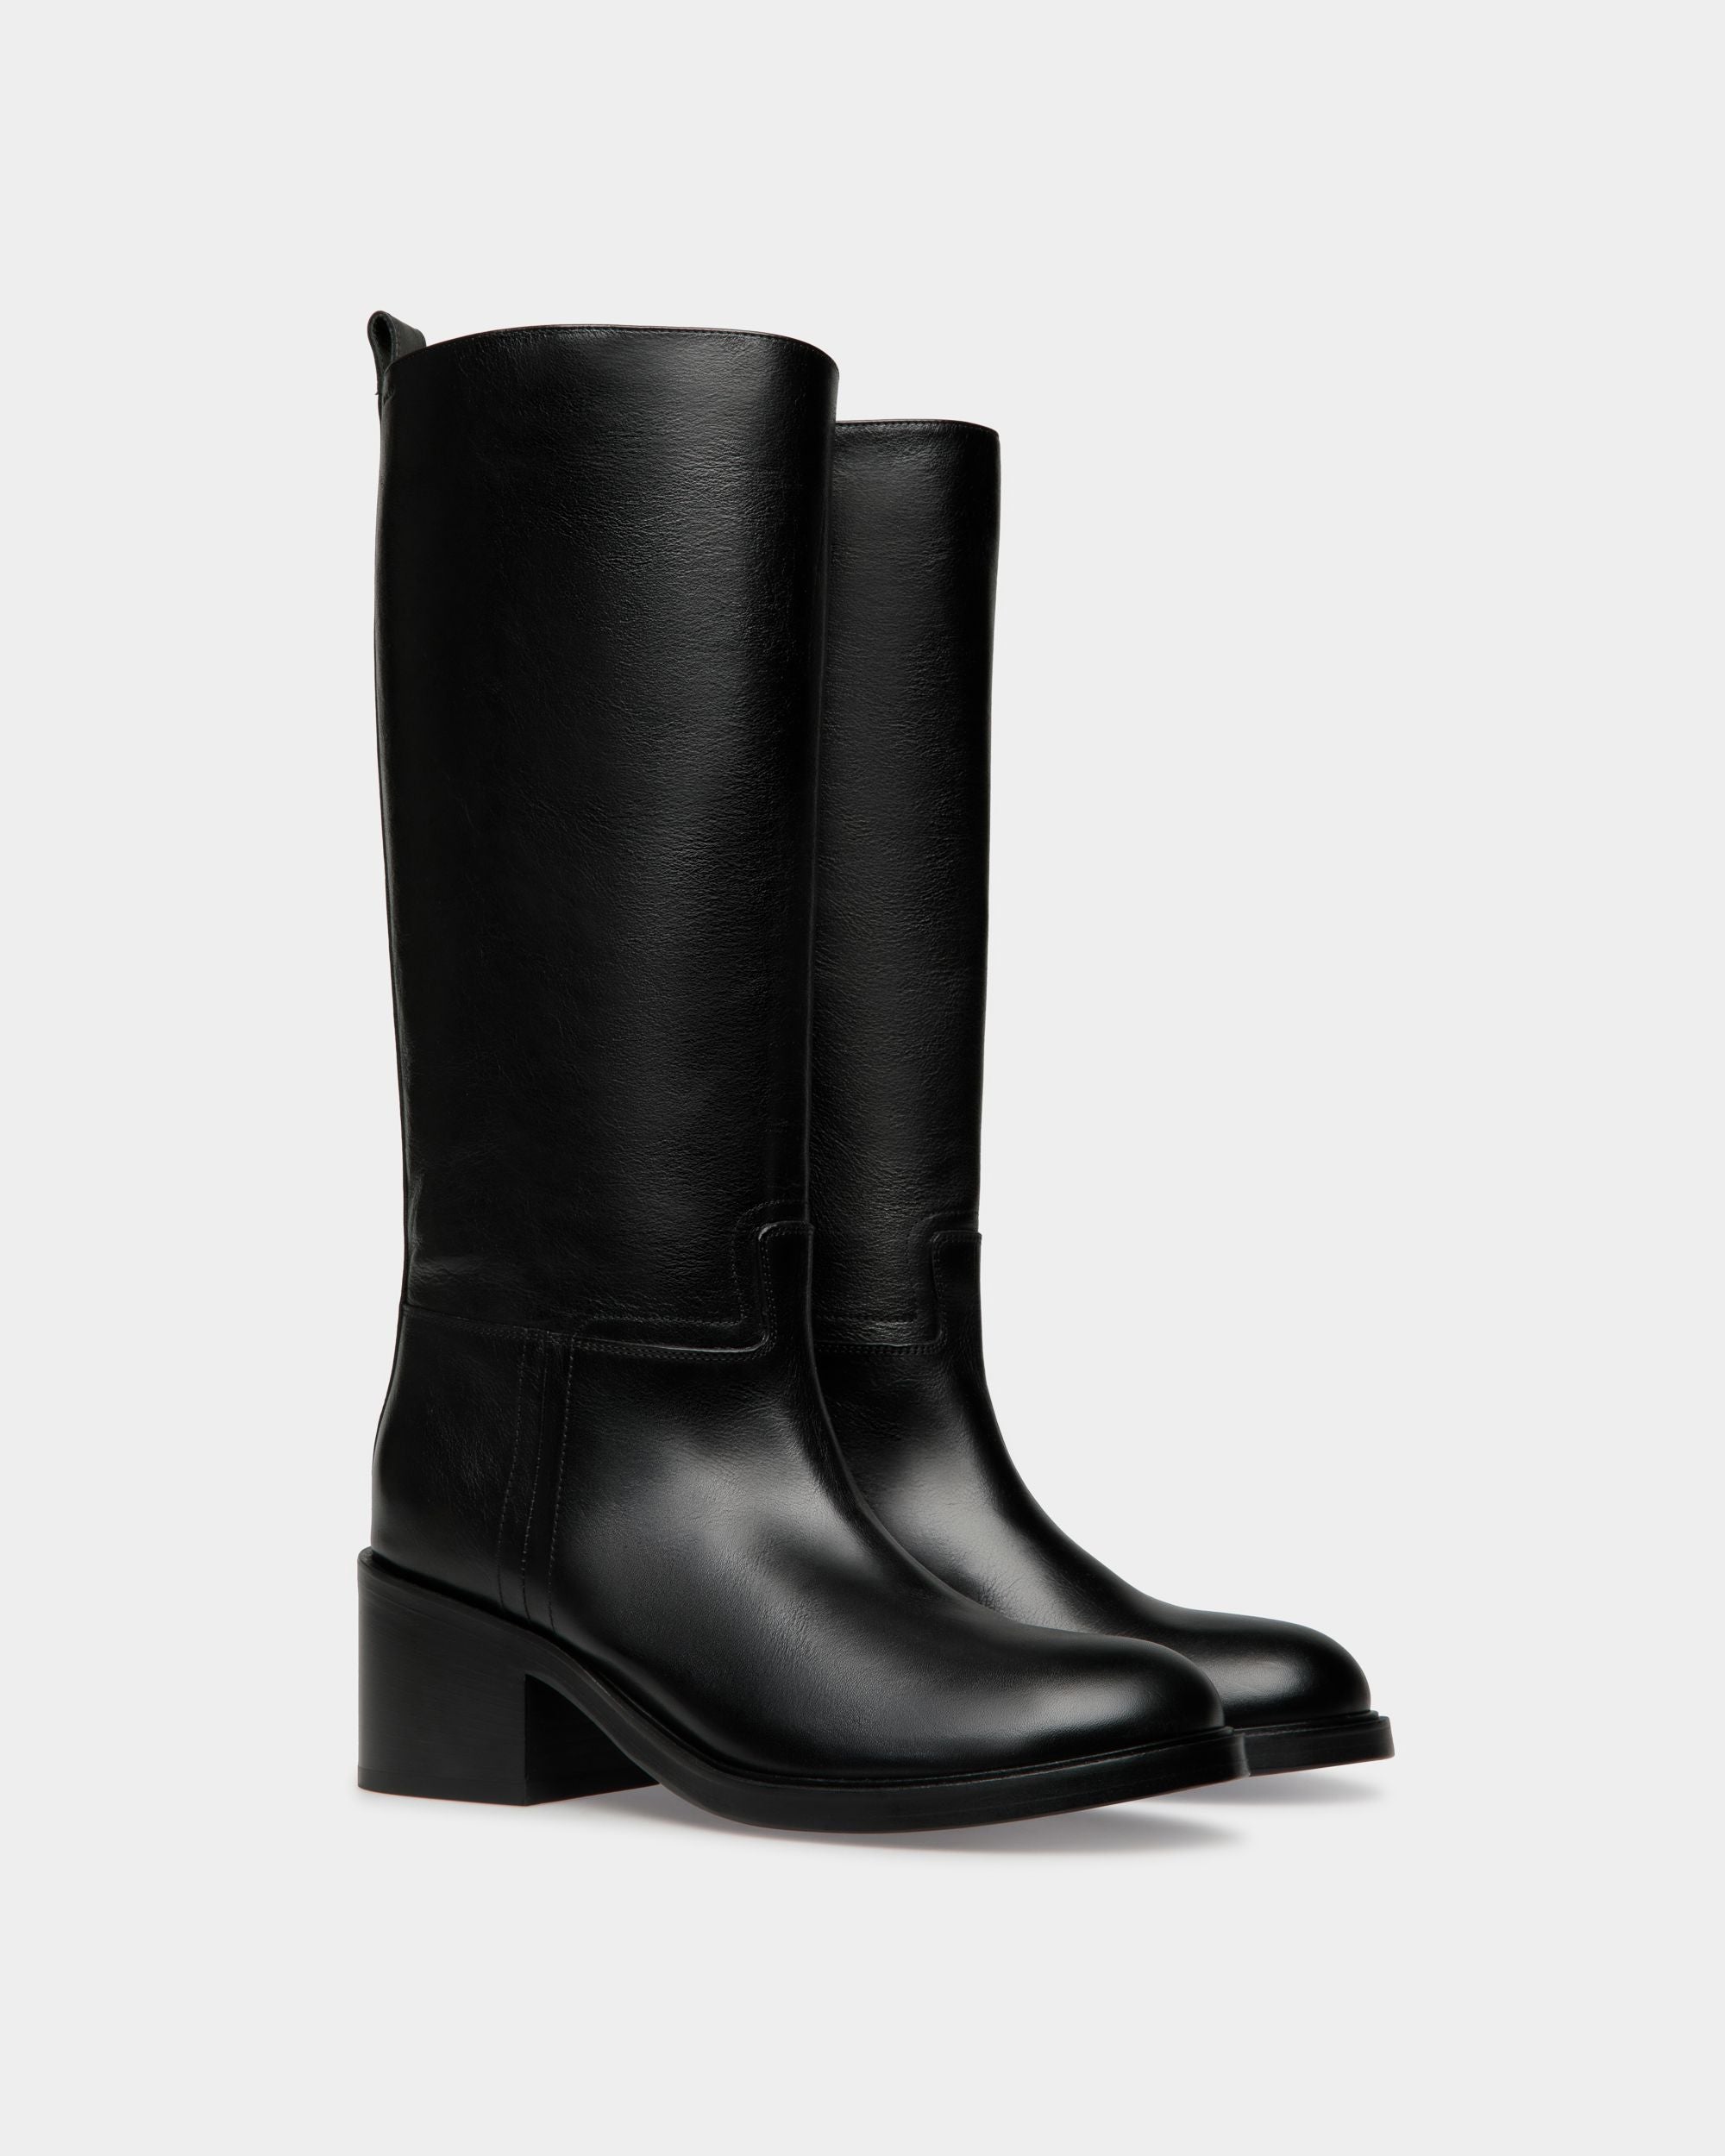 Peggy | Women's Boot in Black Leather | Bally | Still Life 3/4 Front